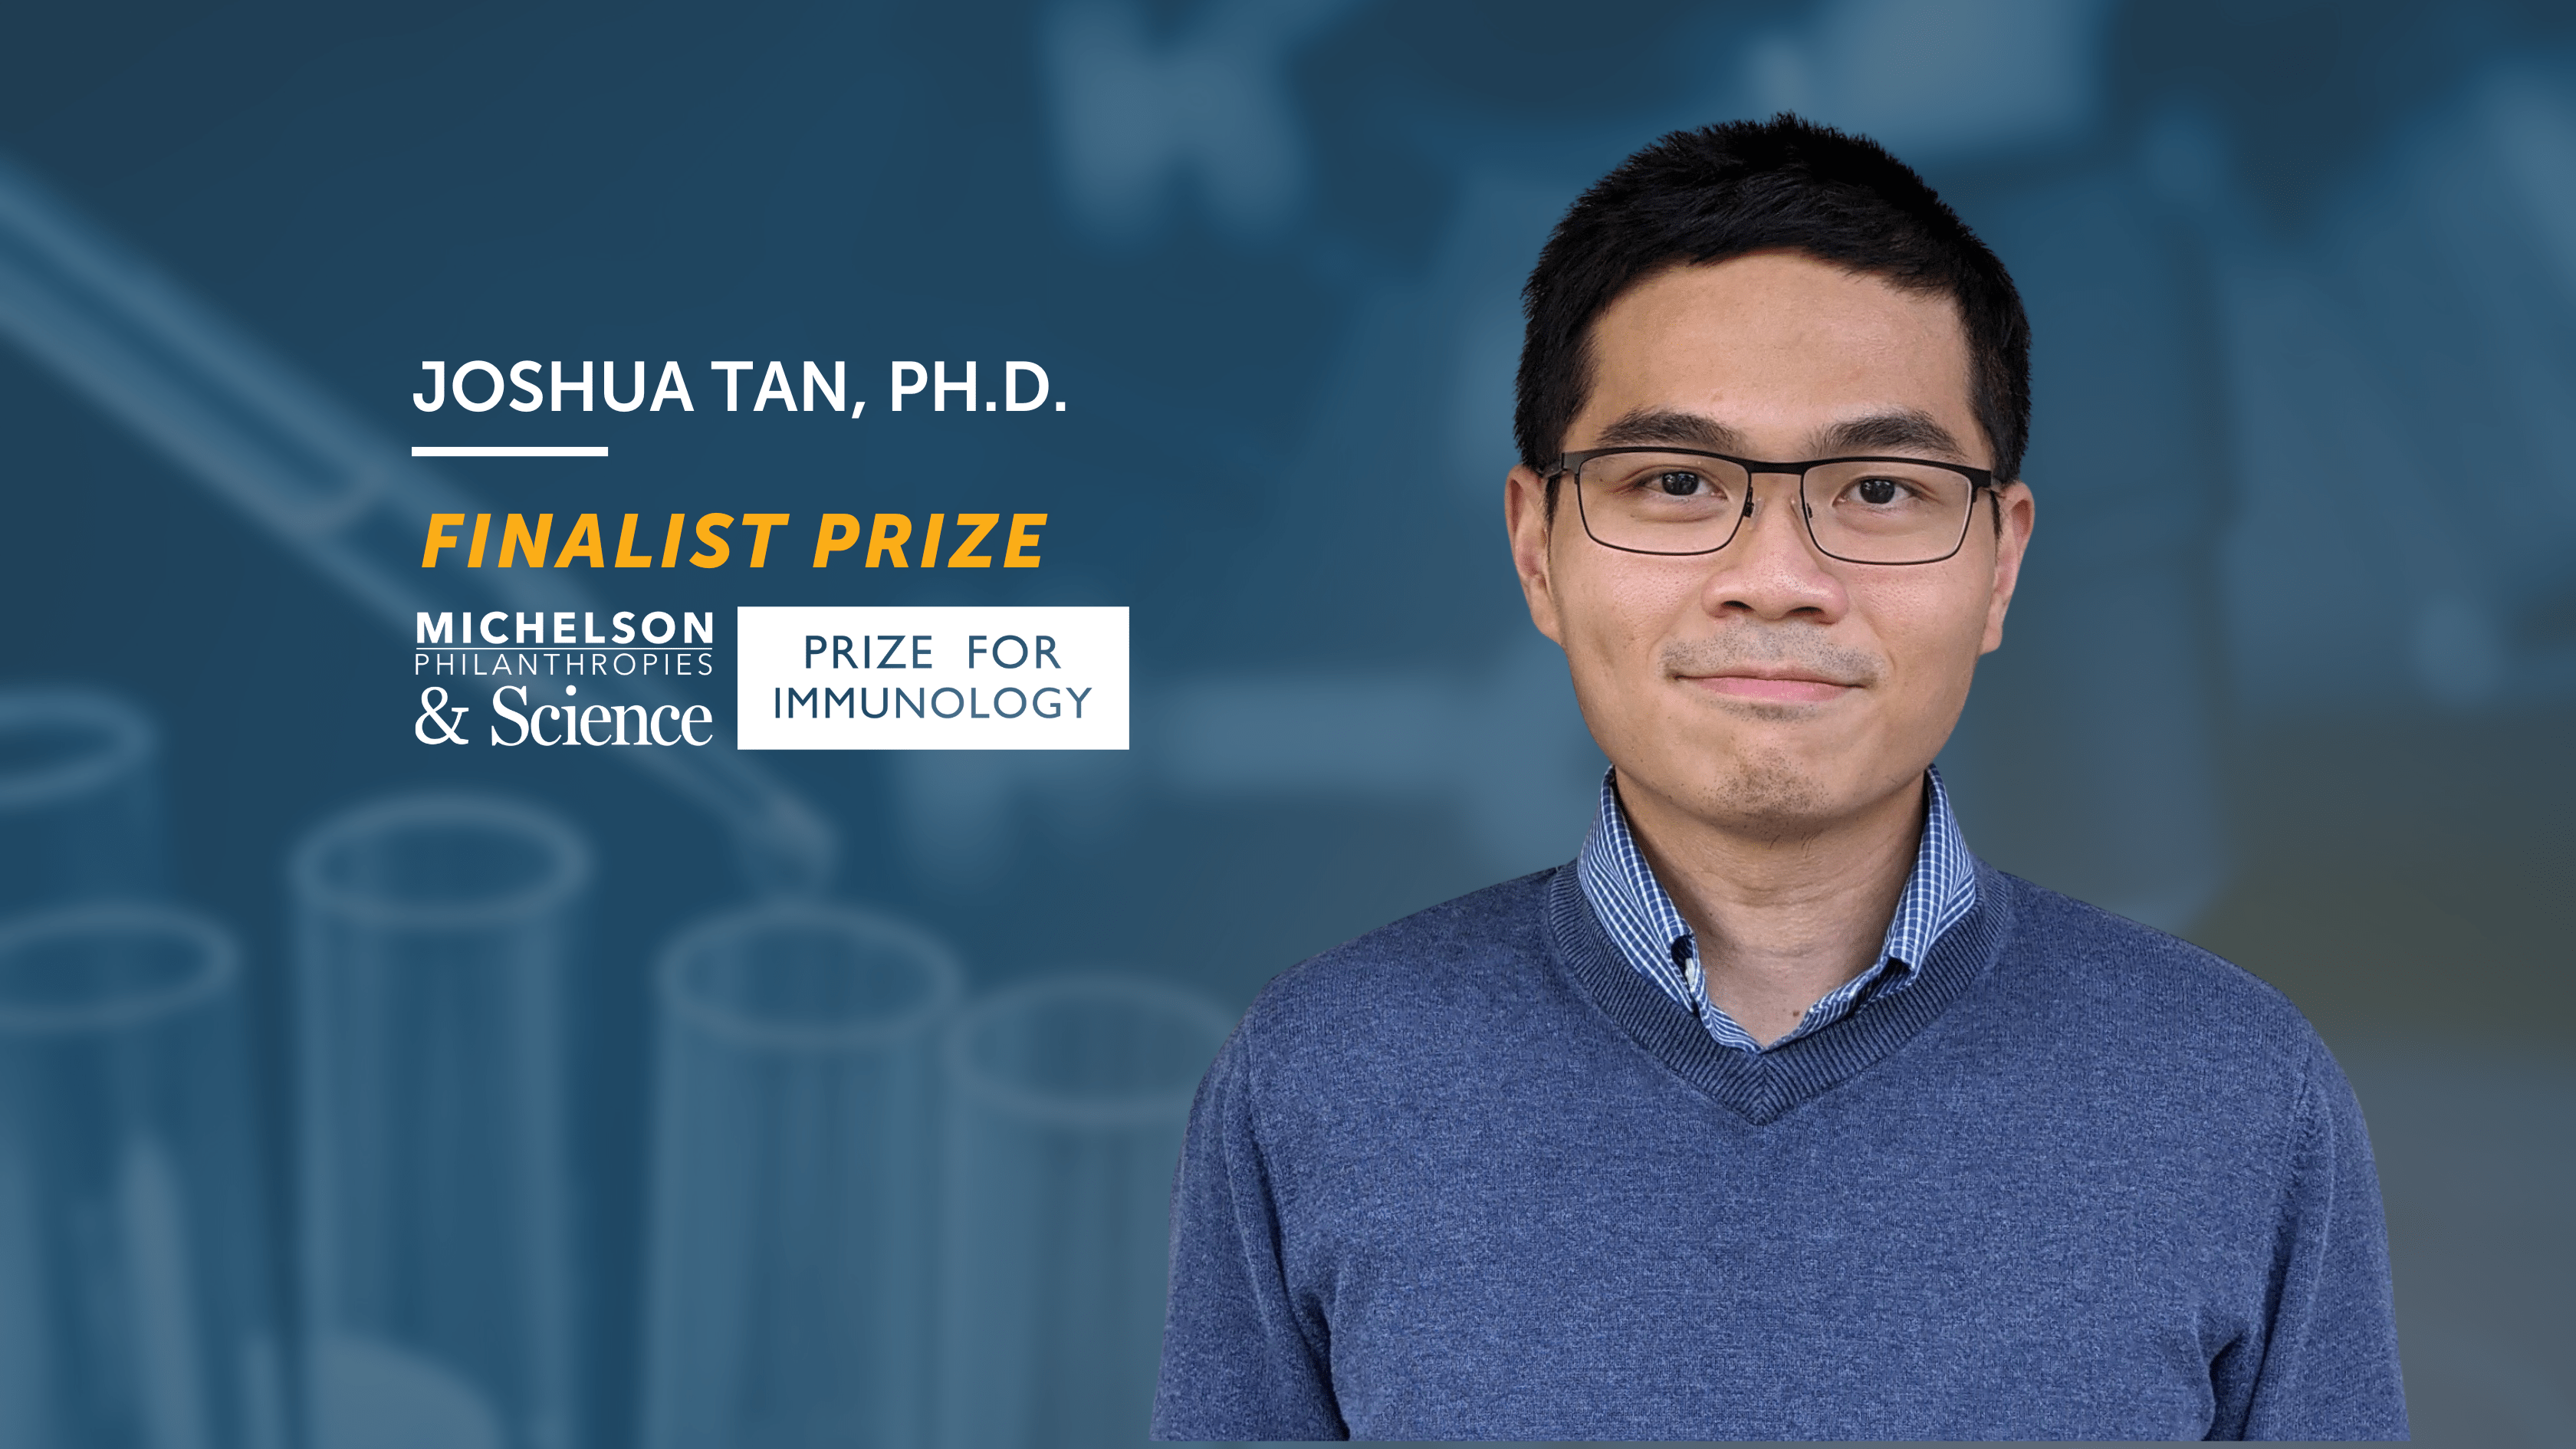 Michelson Prize Finalist Dr. Joshua Tan’s Research Explores the Power of Monoclonal Antibodies to Treat Diseases